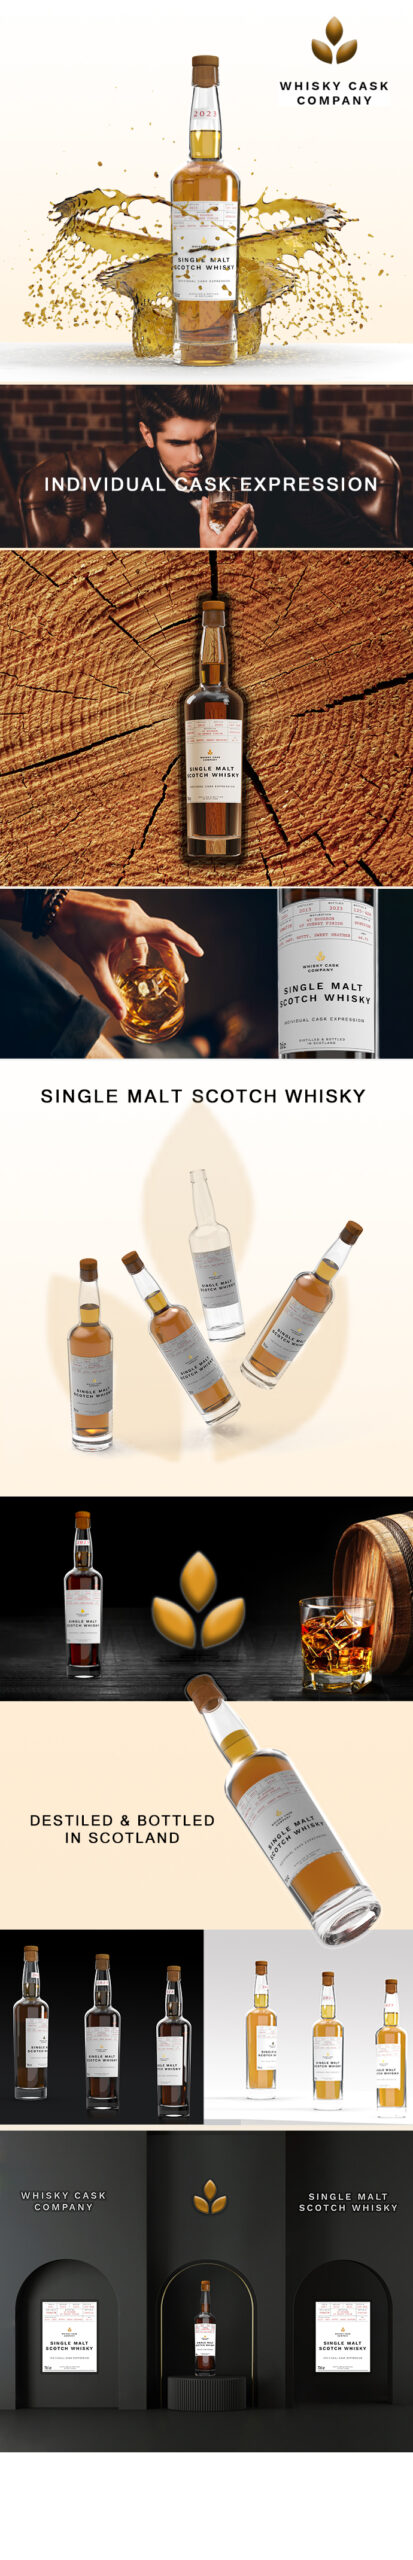 Scotch malt packaging and product design